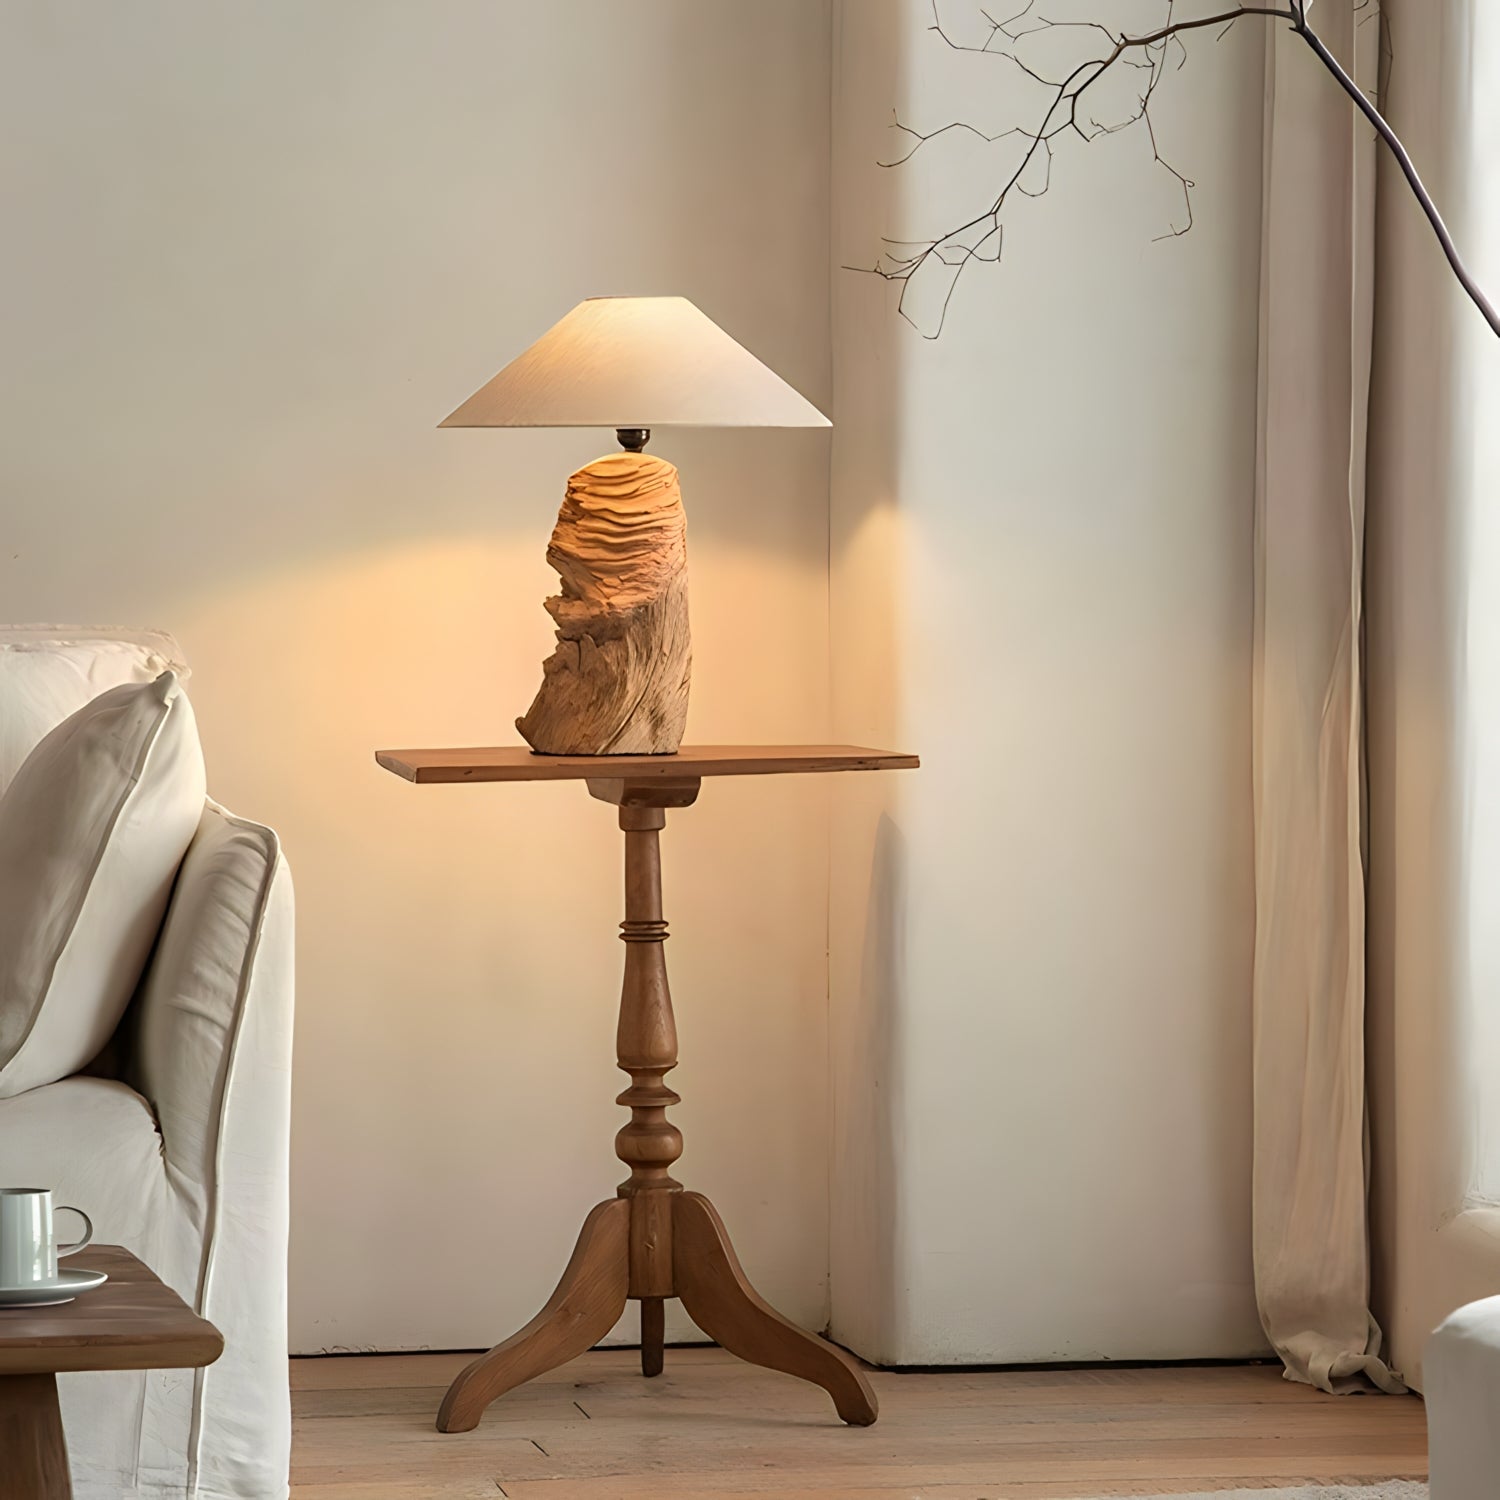 Custom-Crafted Wooden Lamp - Contact Us First